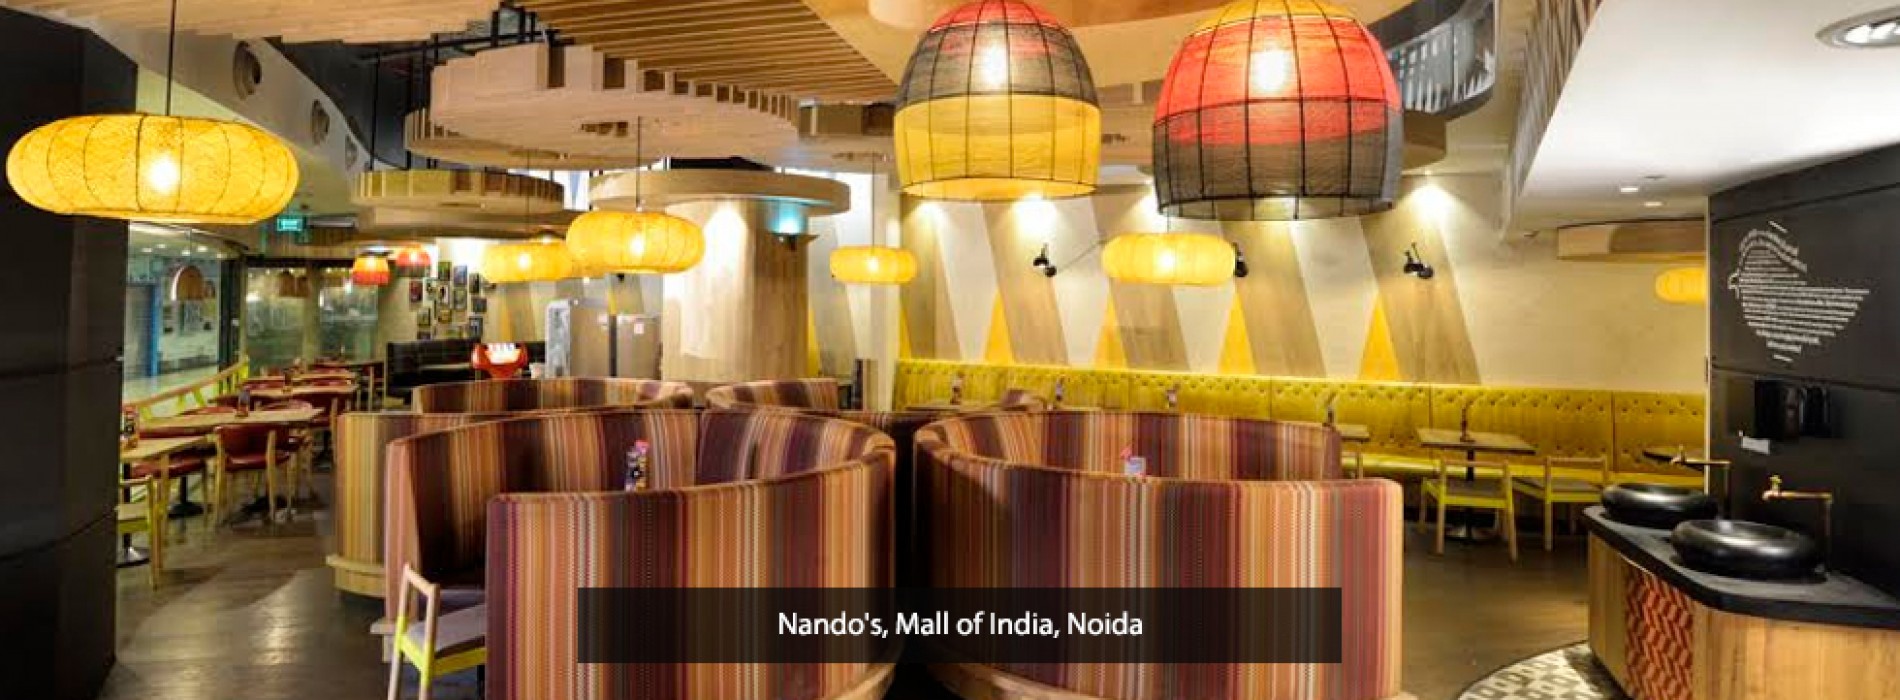 Nando’s launches its biggest outlet in Delhi NCR at DLF Mall of India, Noida